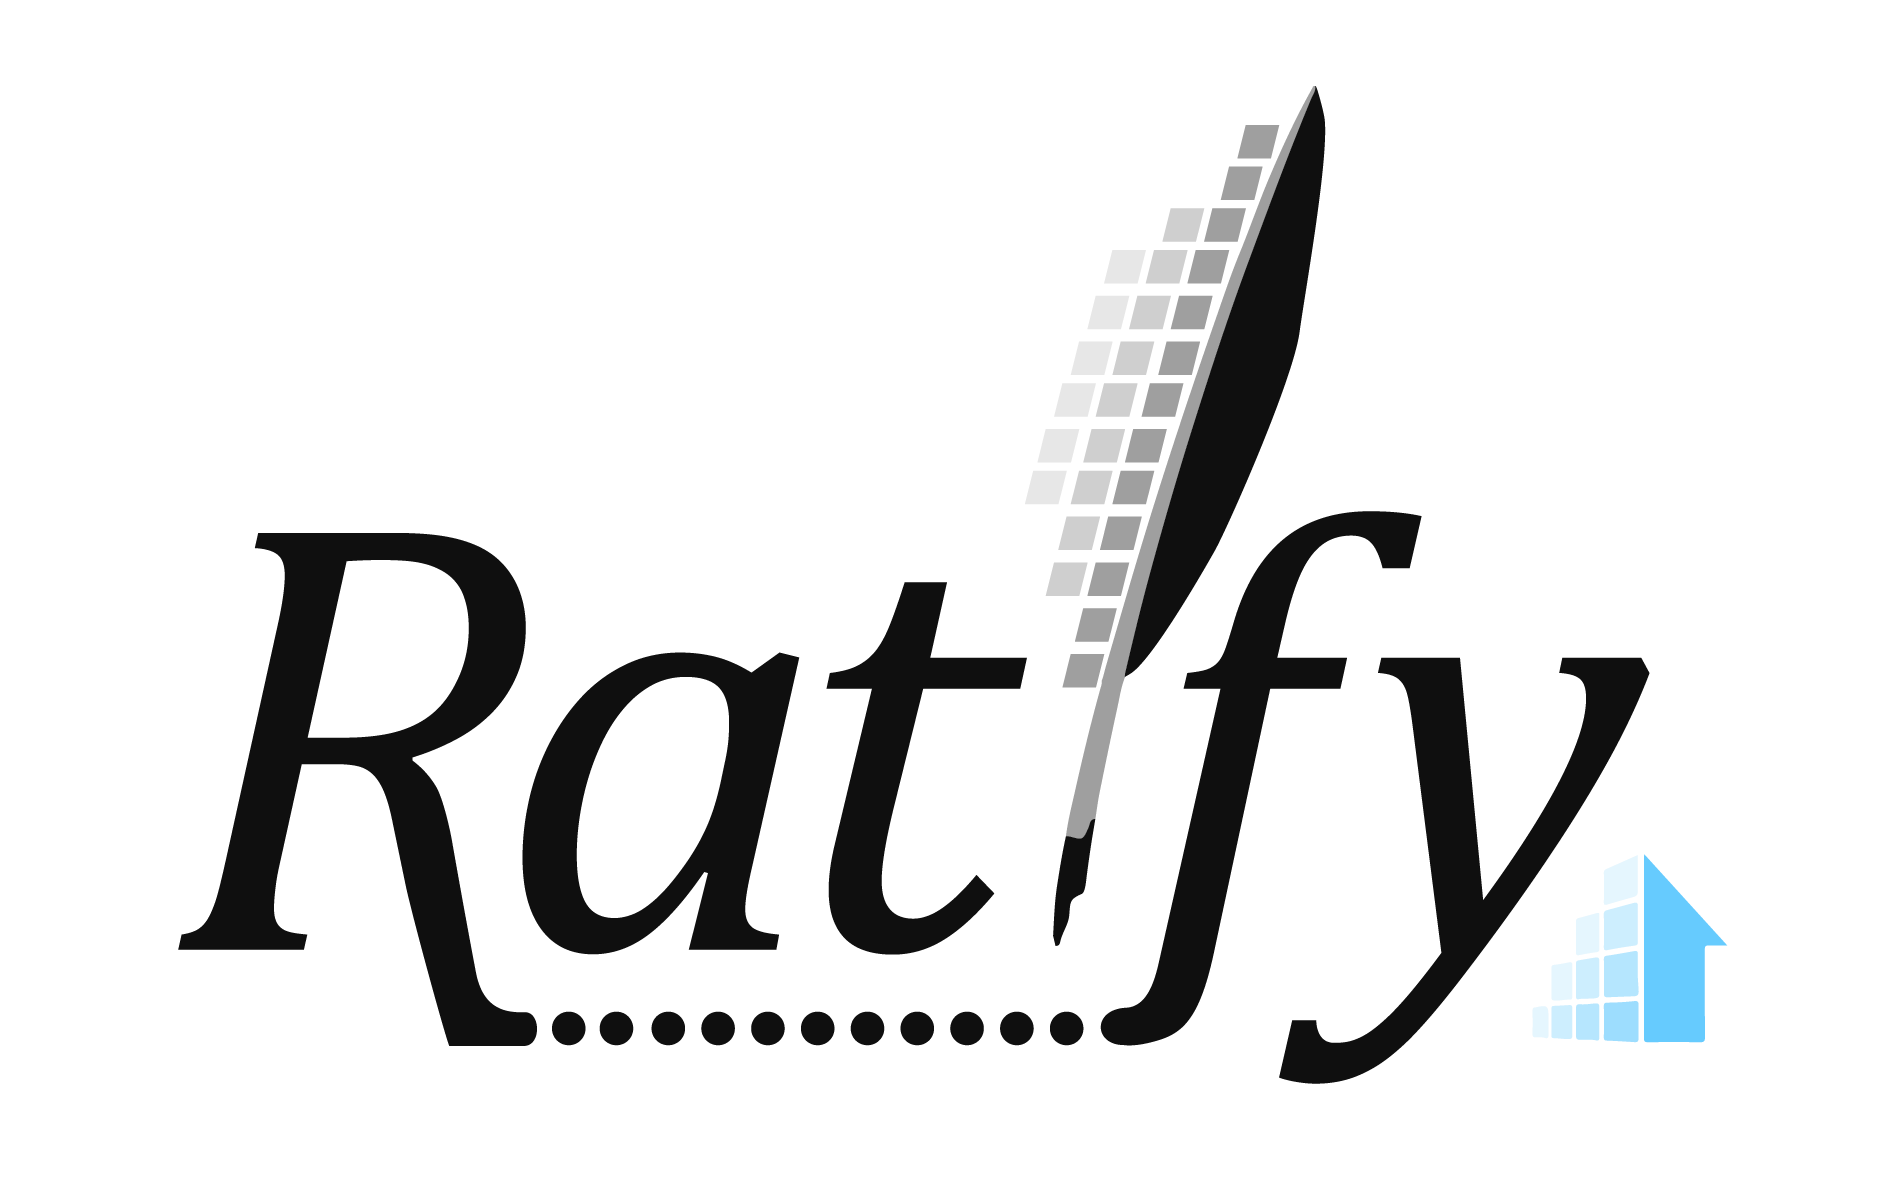 Repree announces Ratify! An Electronic Signature Solution